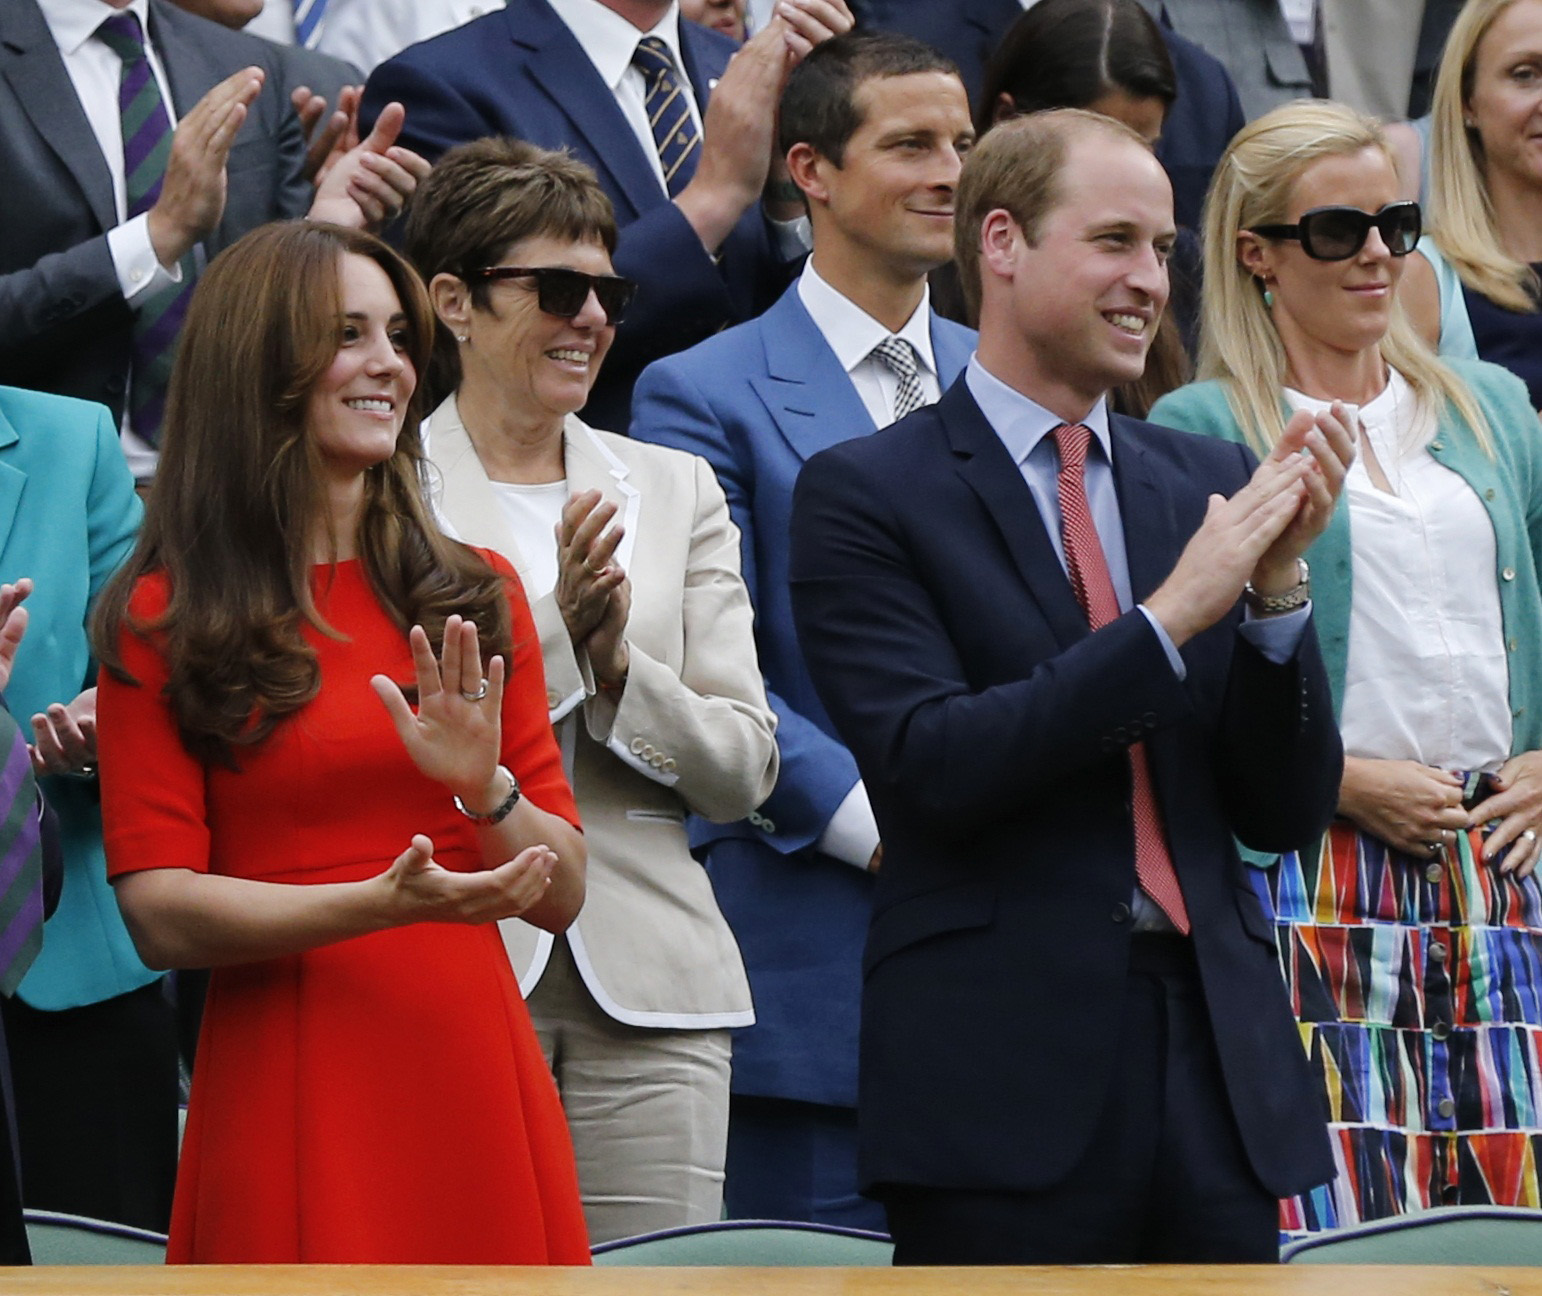 Britain's Catherine Duchess of Cambridge and Prince William (R) applaud after Andy Murray of Britain won his match against Vasek Pospisil of Canada at the Wimbledon Tennis Championships in London, July 8, 2015. REUTERS/Suzanne Plunkett